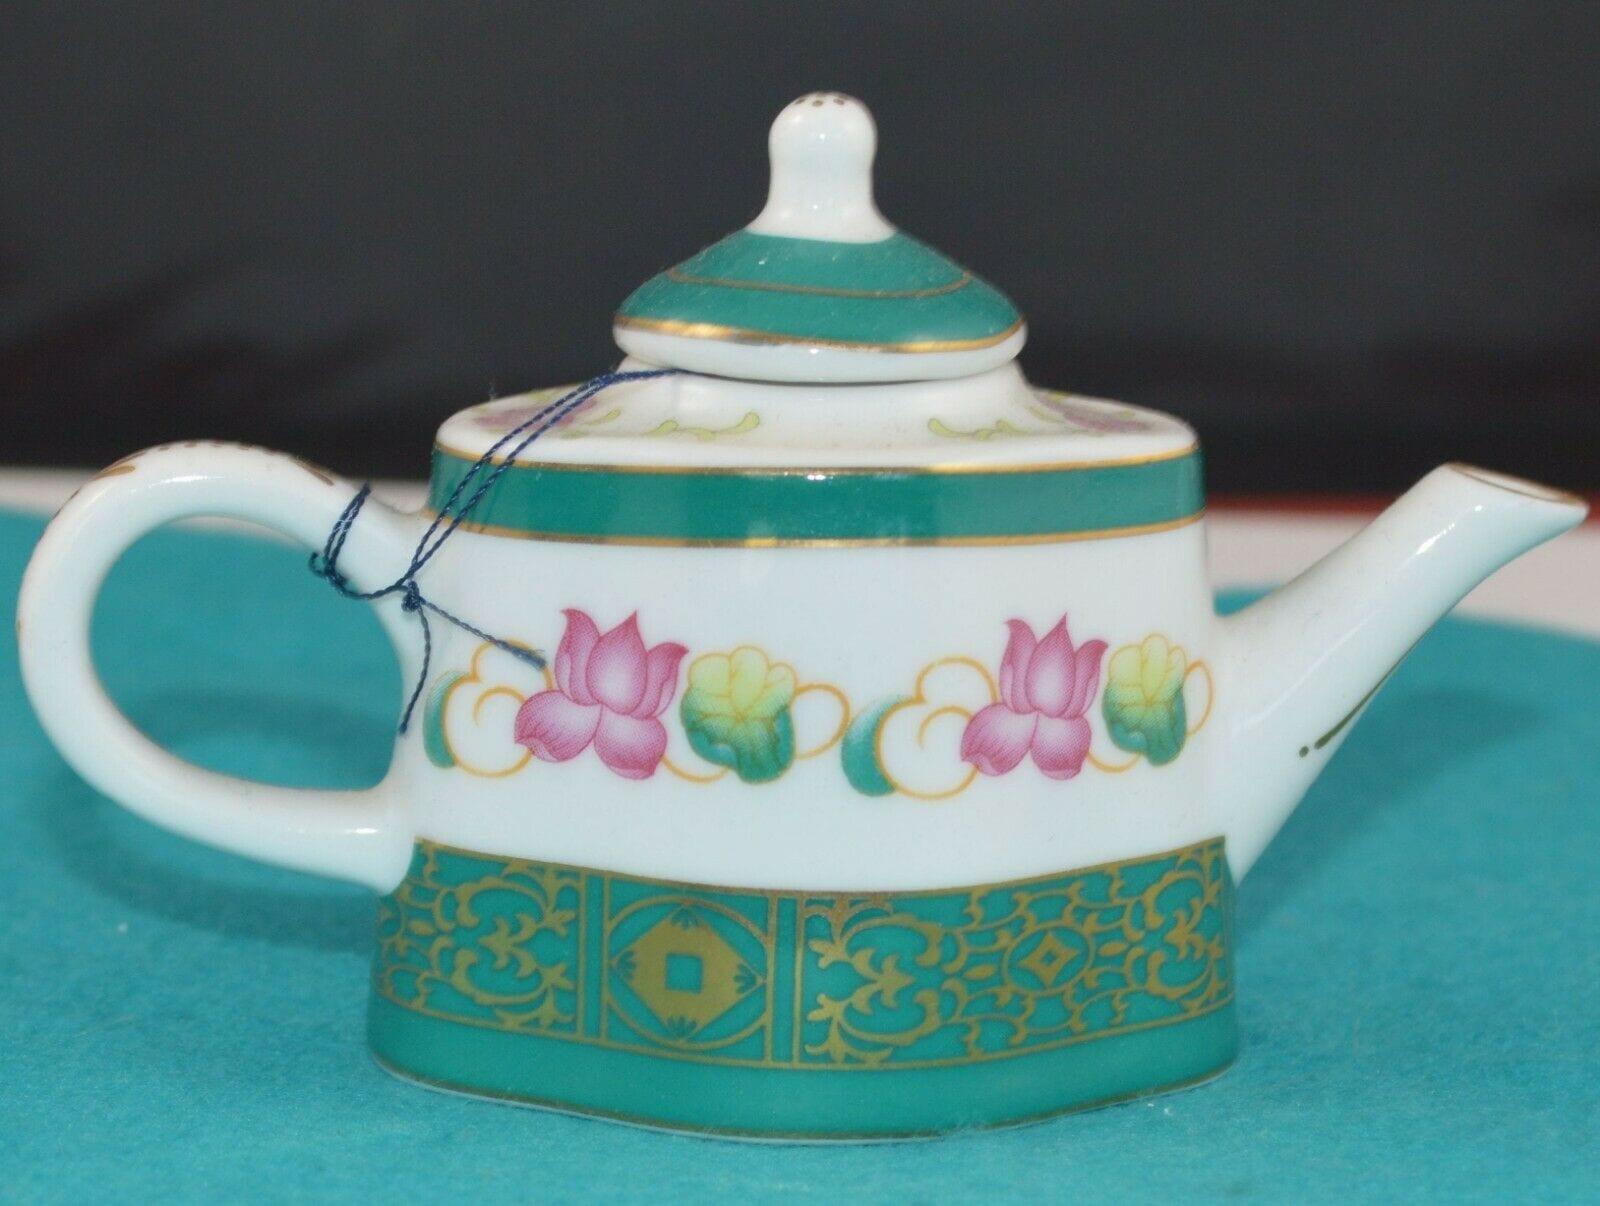 PORCELAIN ART THE MINIATURE TEAPOT COLLECTION WITH GREEN LID AND PINK FLOWERS HAS TAG(PREVIOUSLY OWNED)  - TMD167207